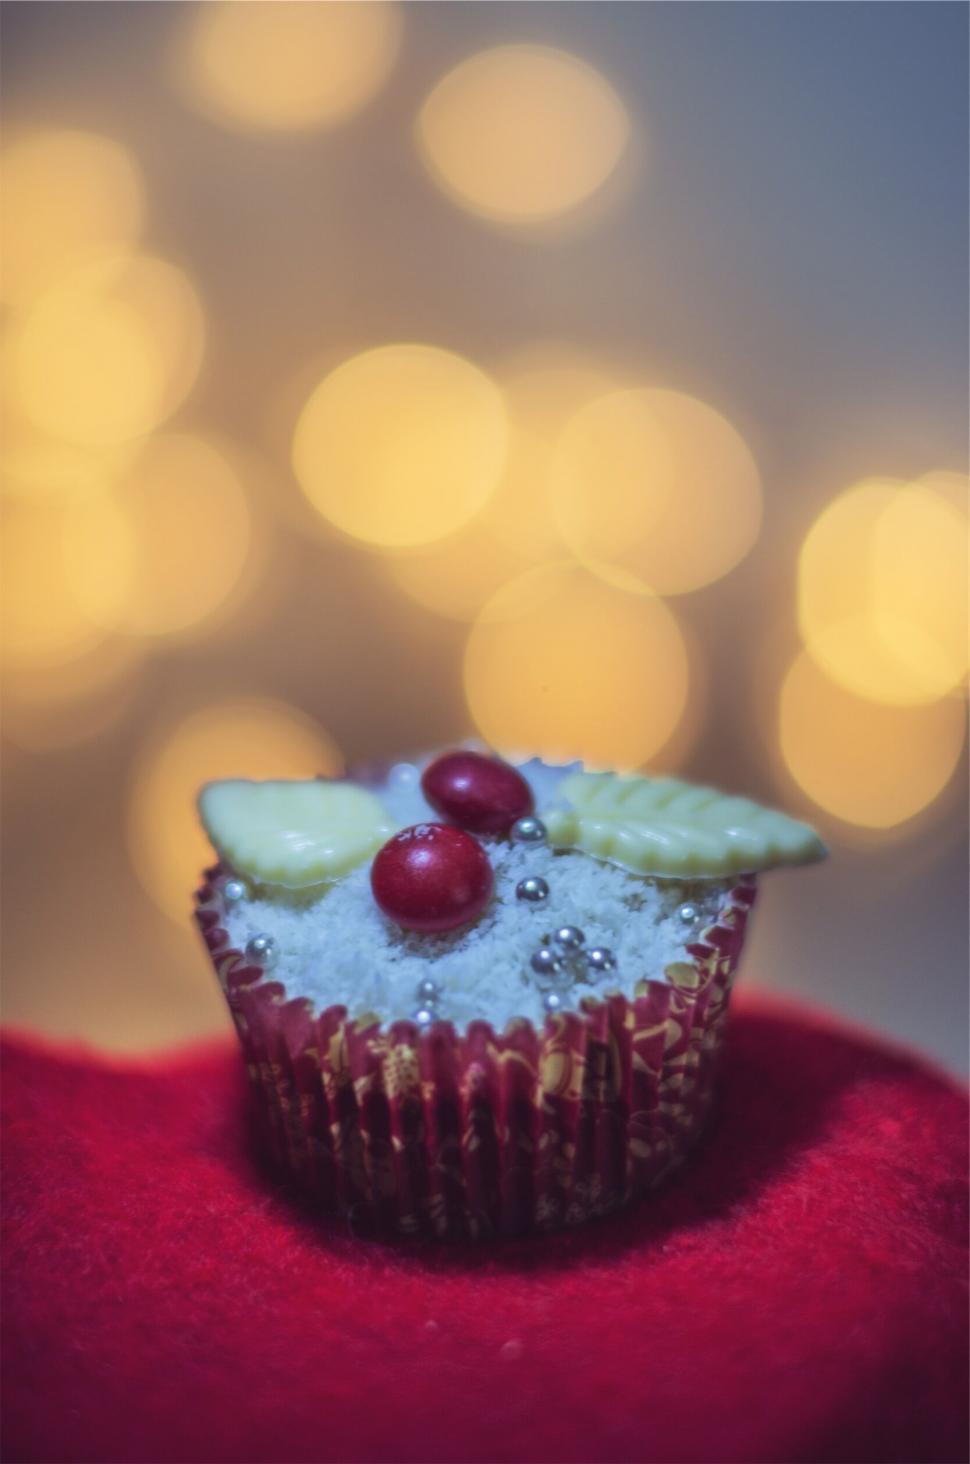 Free Image of A cupcake with a red and white frosting and candy 